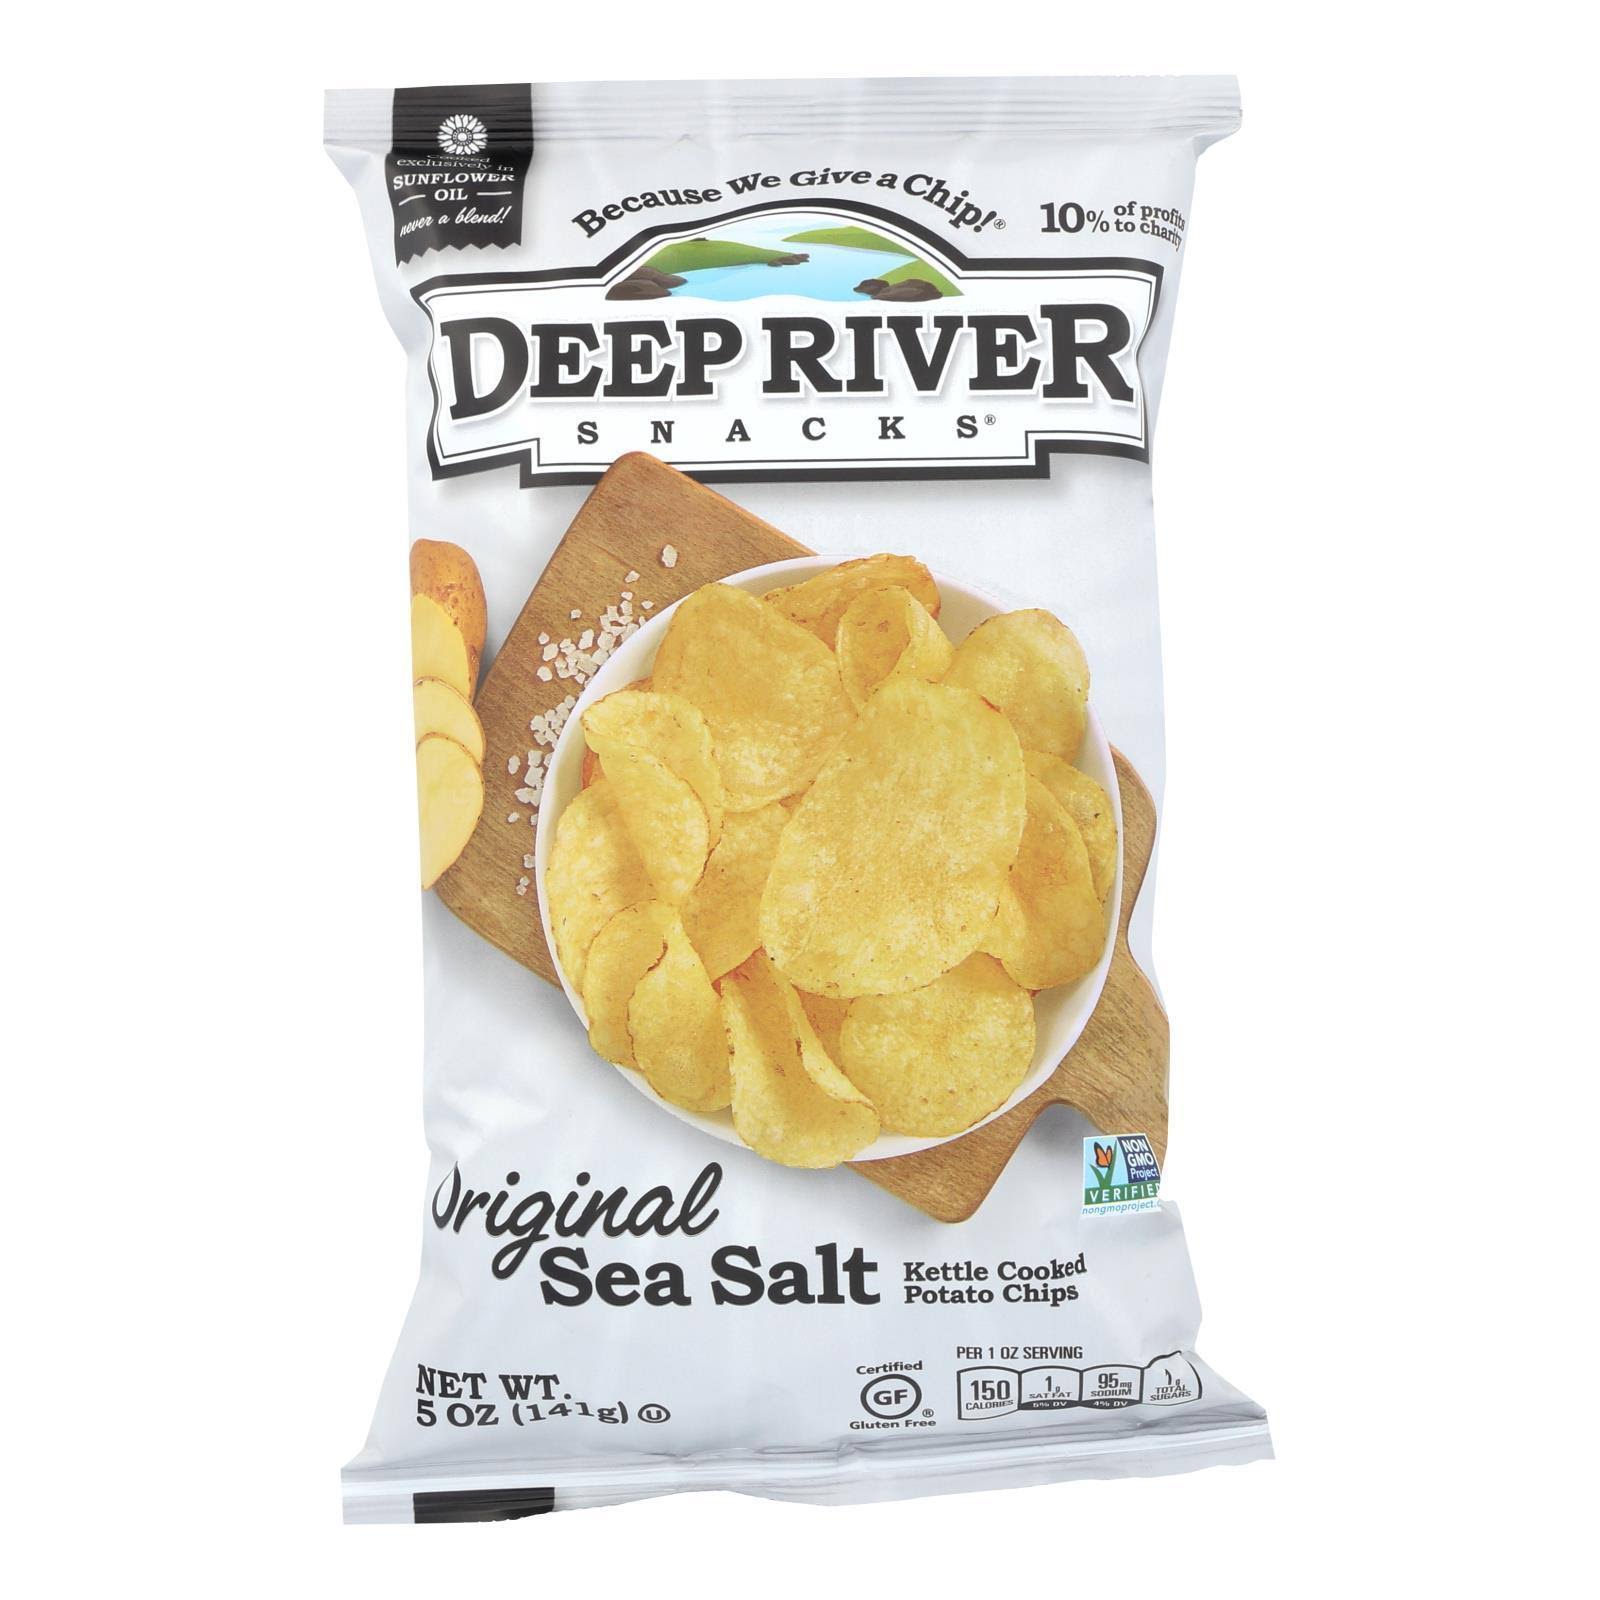 Deep River Snacks Kettle Cooked Potato Chips - Original Salted, 57g